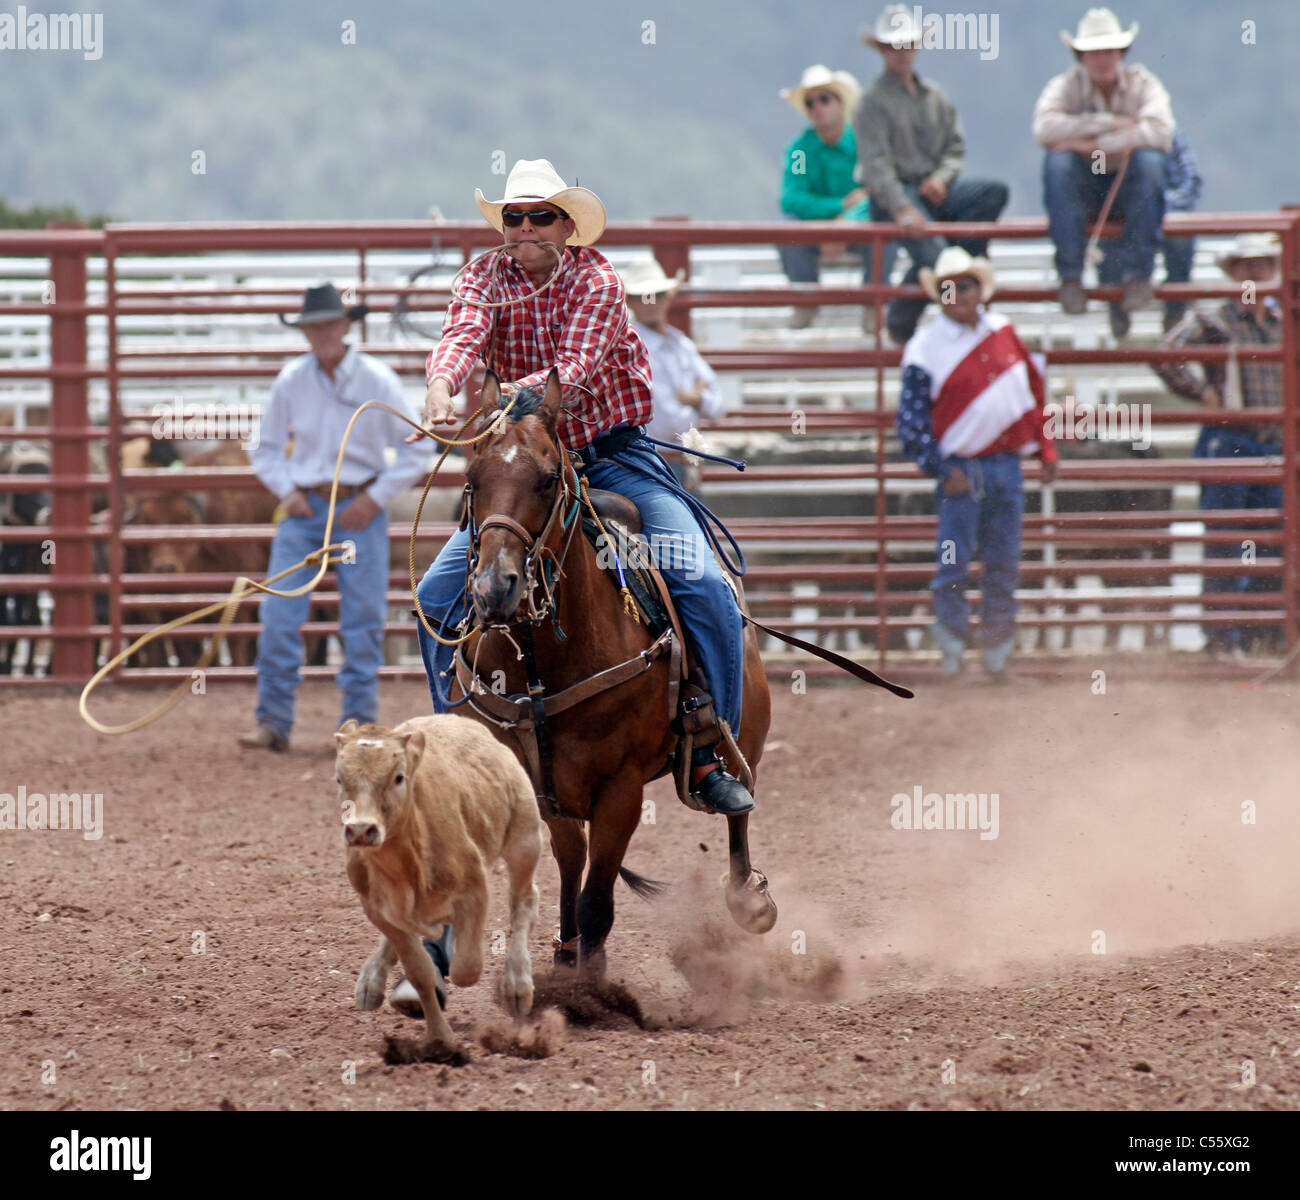 Competitor in the calf roping event at the Annual Indian Rodeo held in Mescalero, New Mexico. Stock Photo